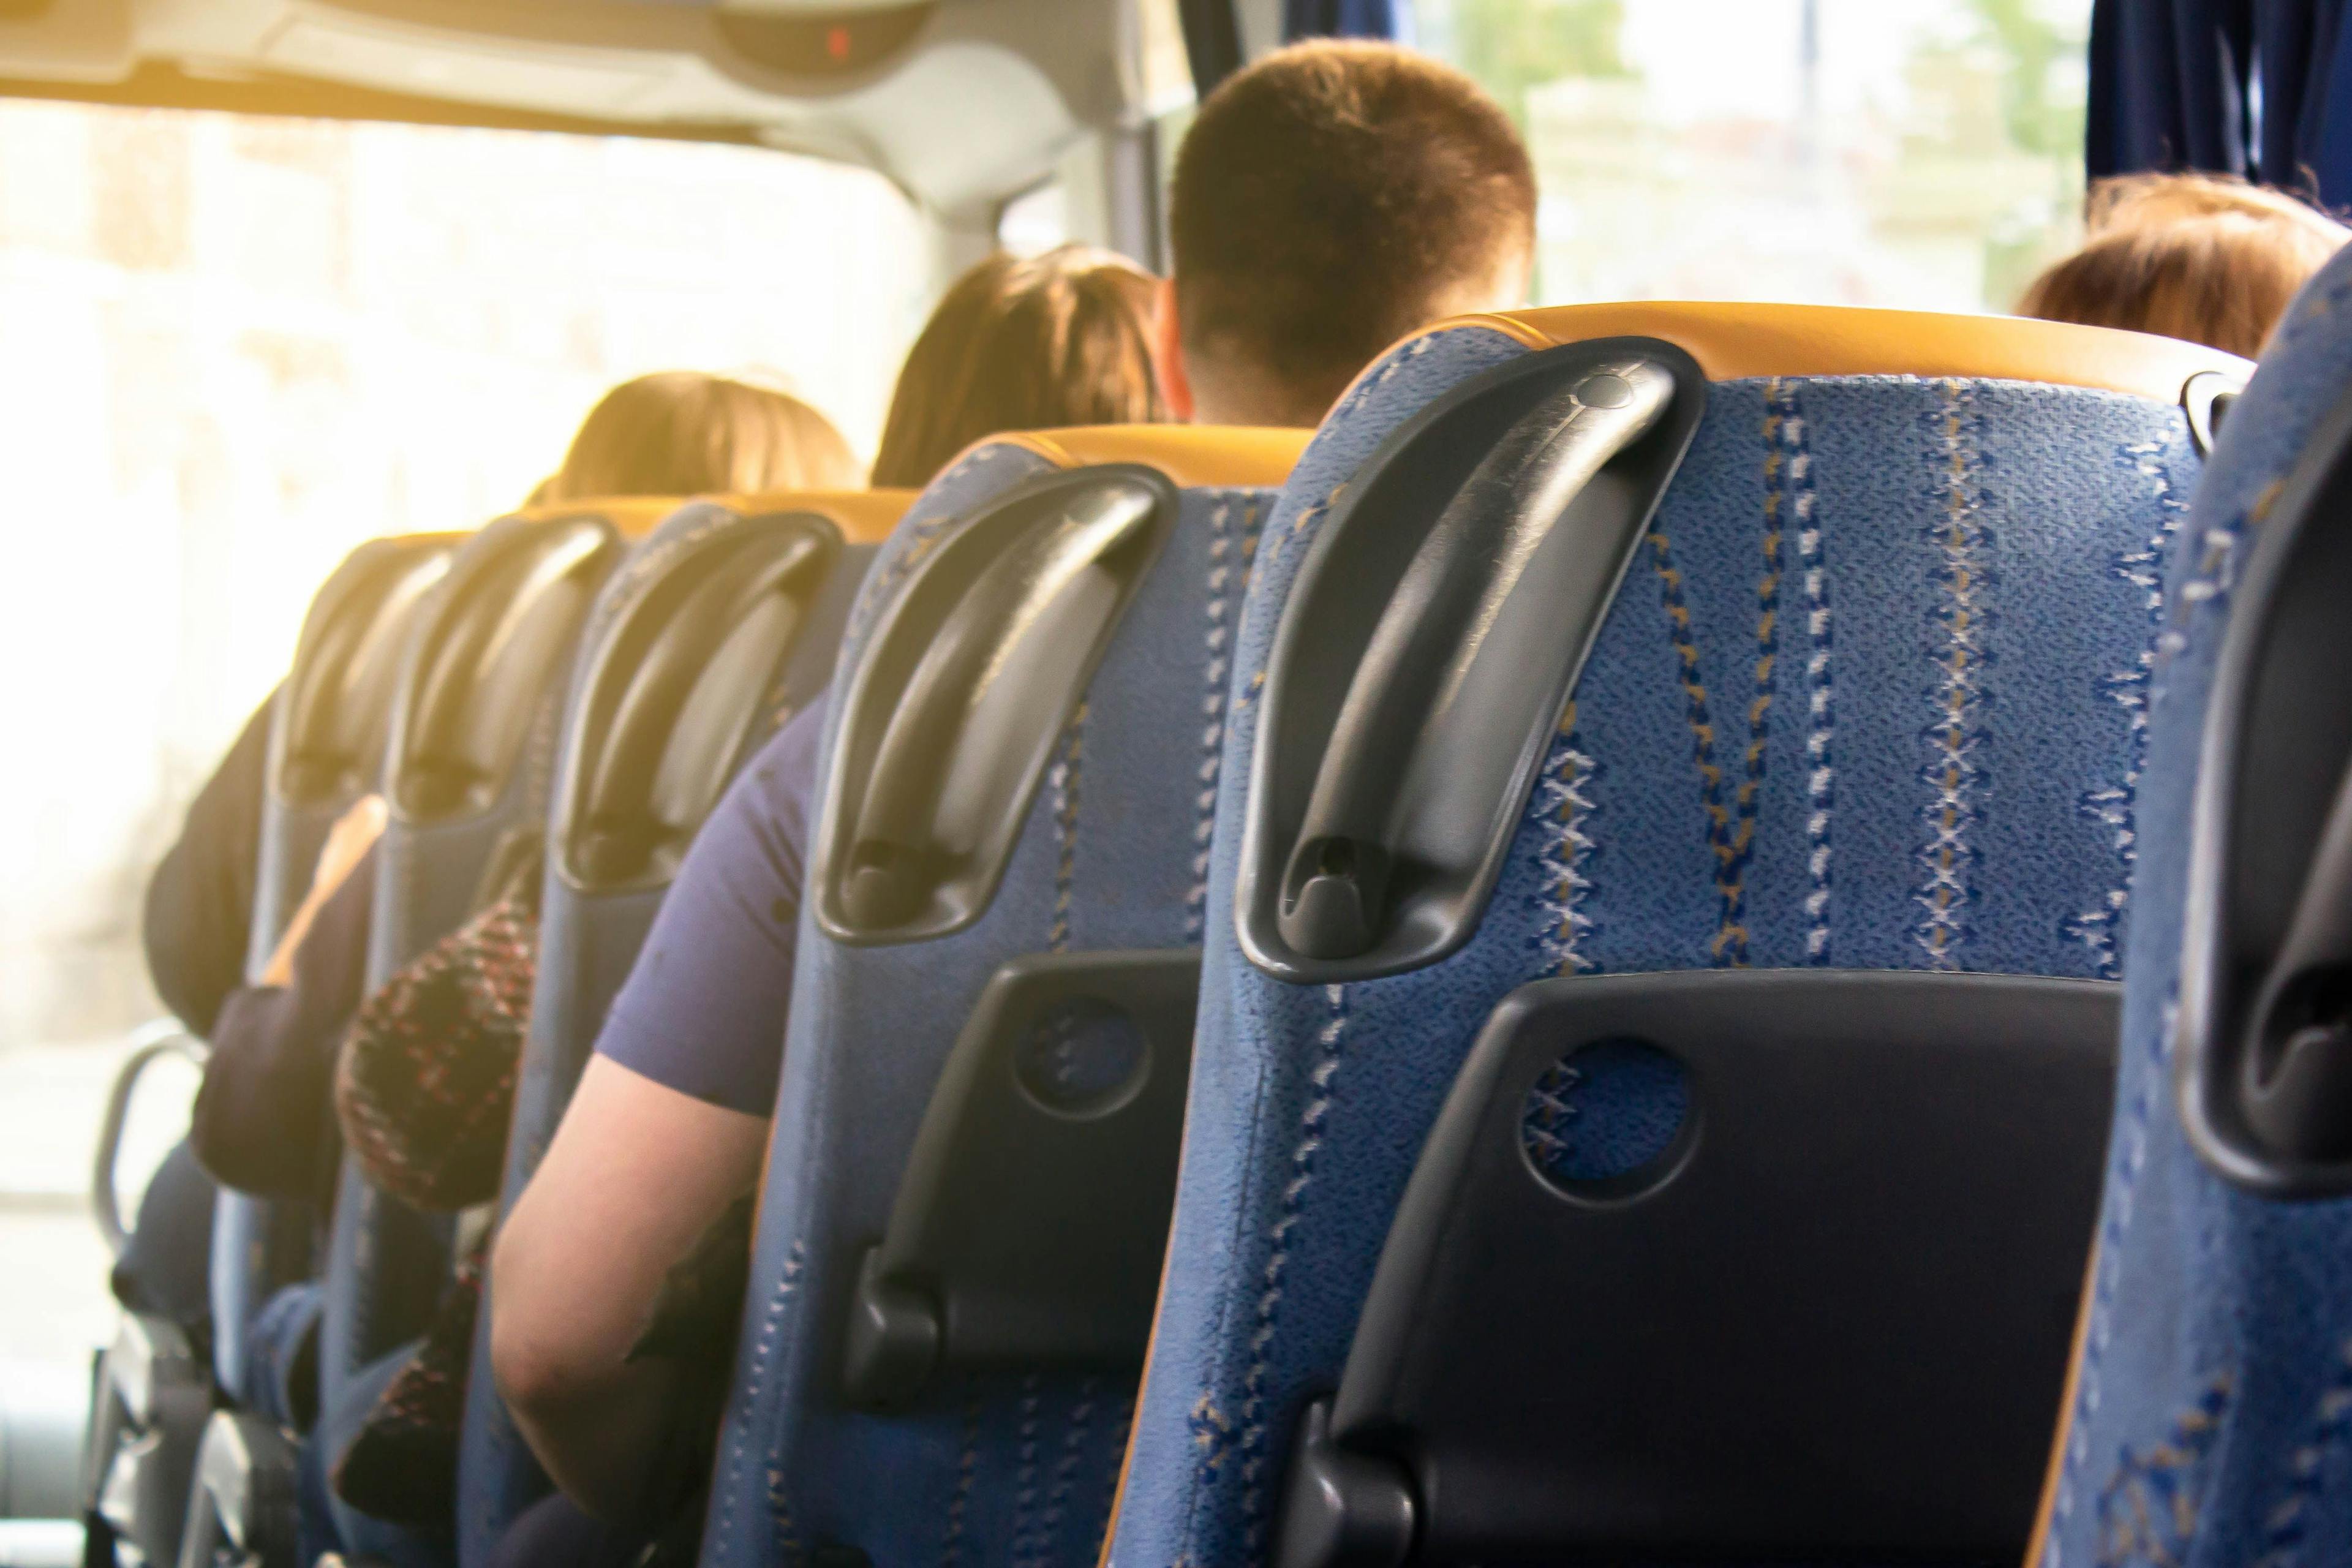 Your Seat on Public Transportation Determines Exposure to Infectious Droplets